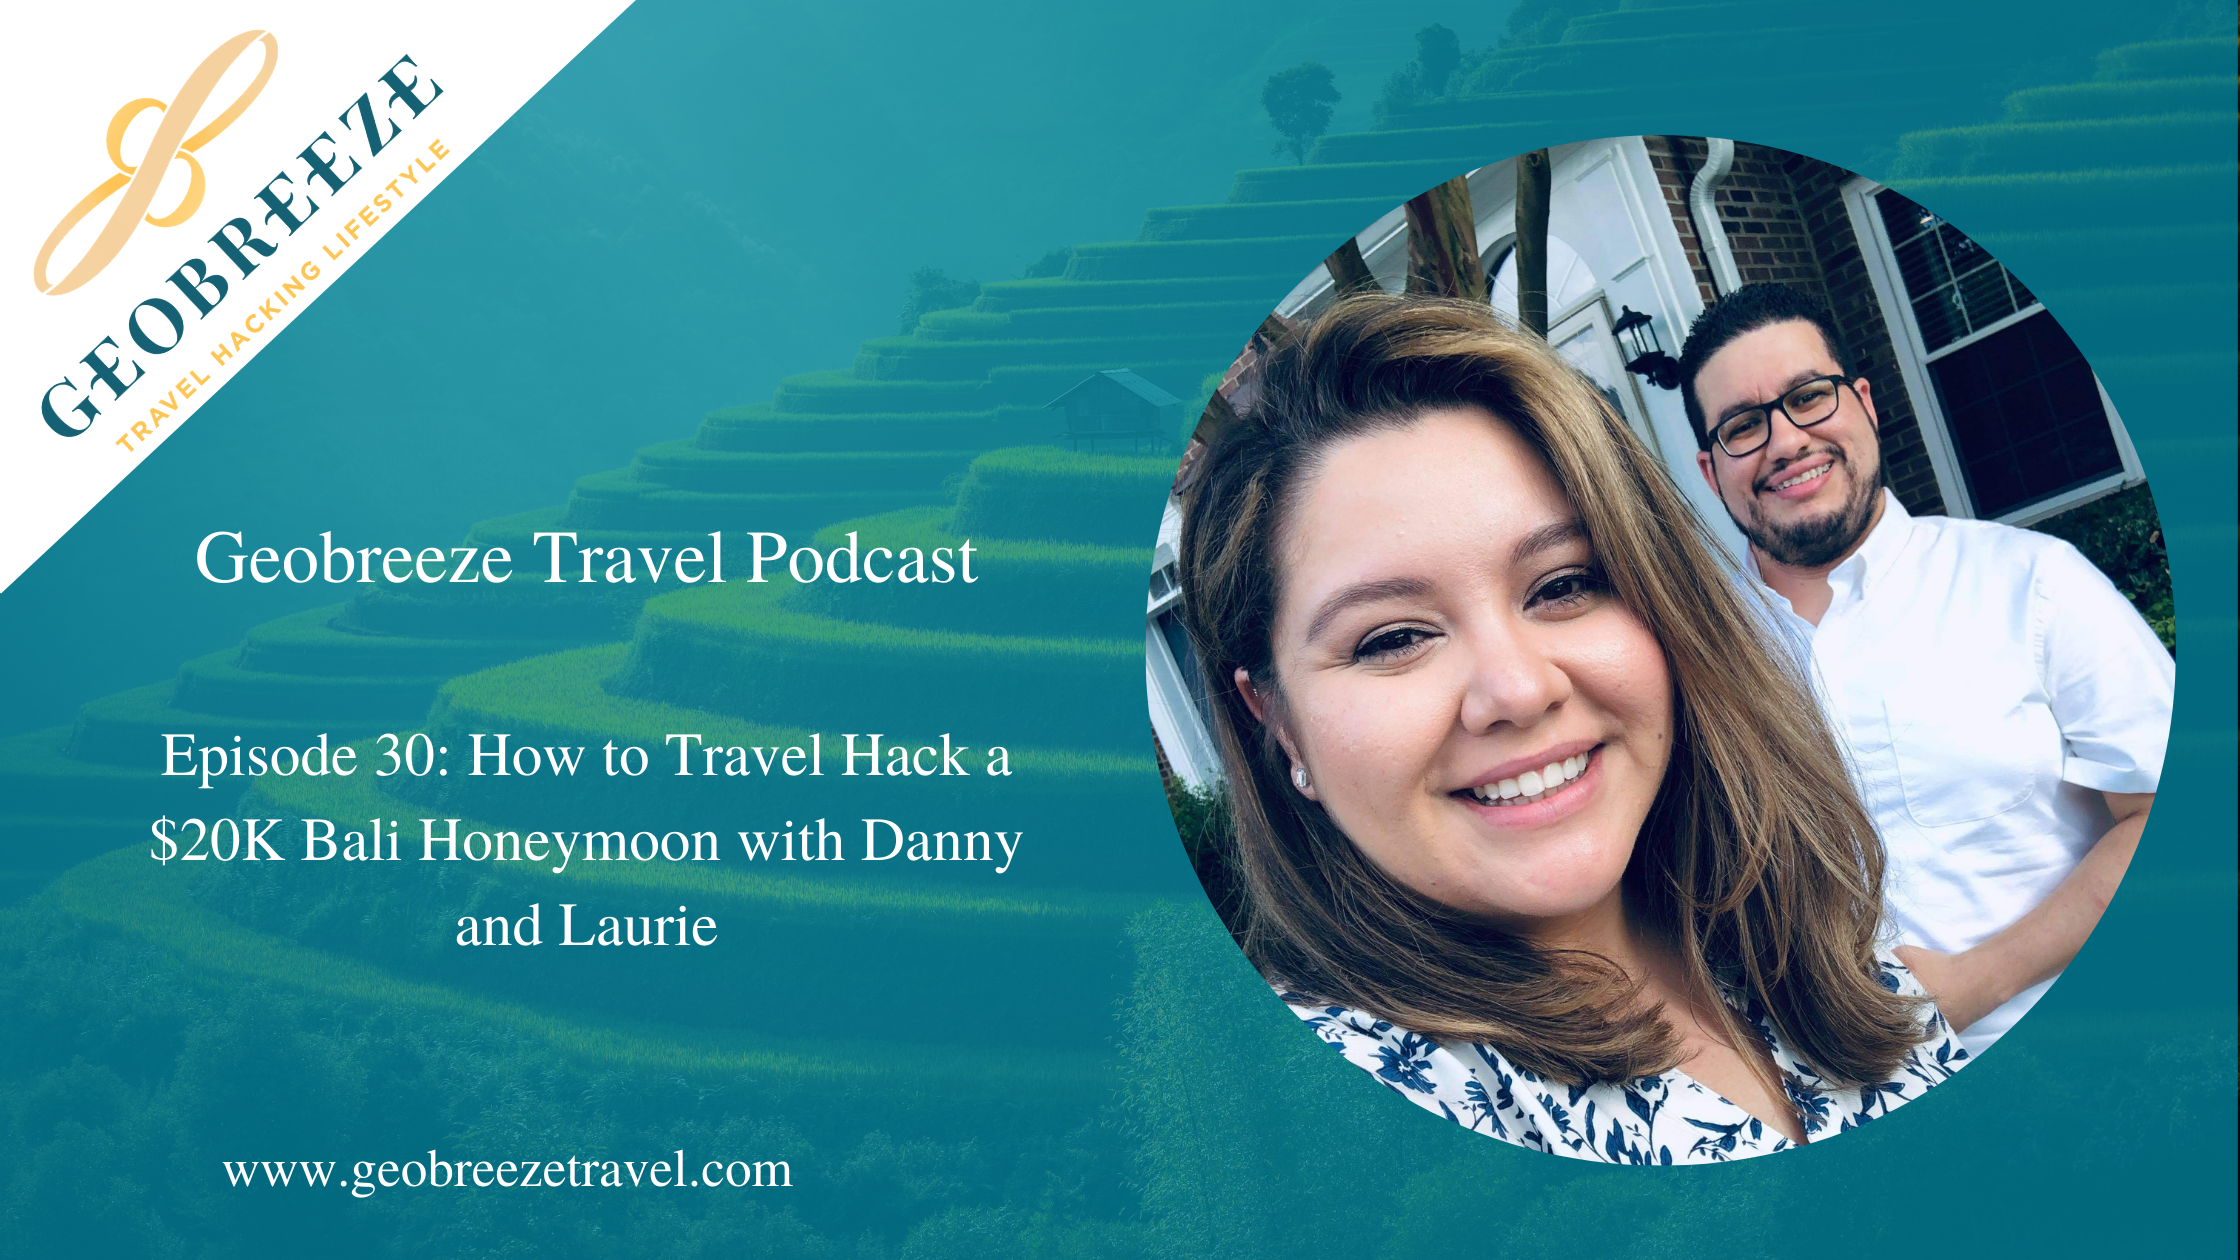 Episode 30: How to Travel Hack a $20K Bali Honeymoon with Danny and Laurie